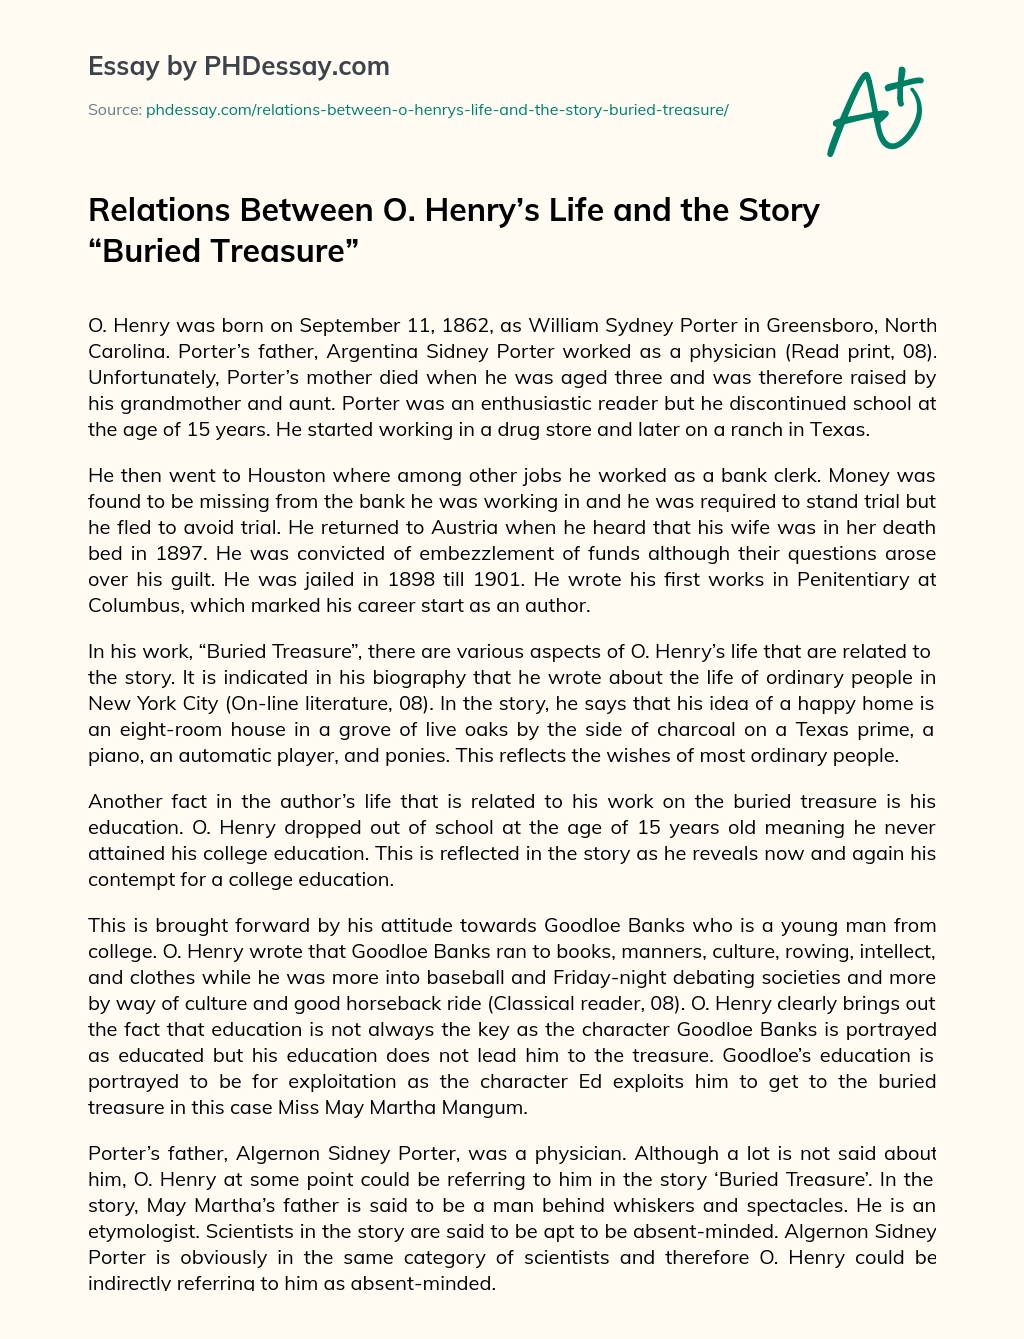 Relations Between O. Henry’s Life and the Story “Buried Treasure” essay